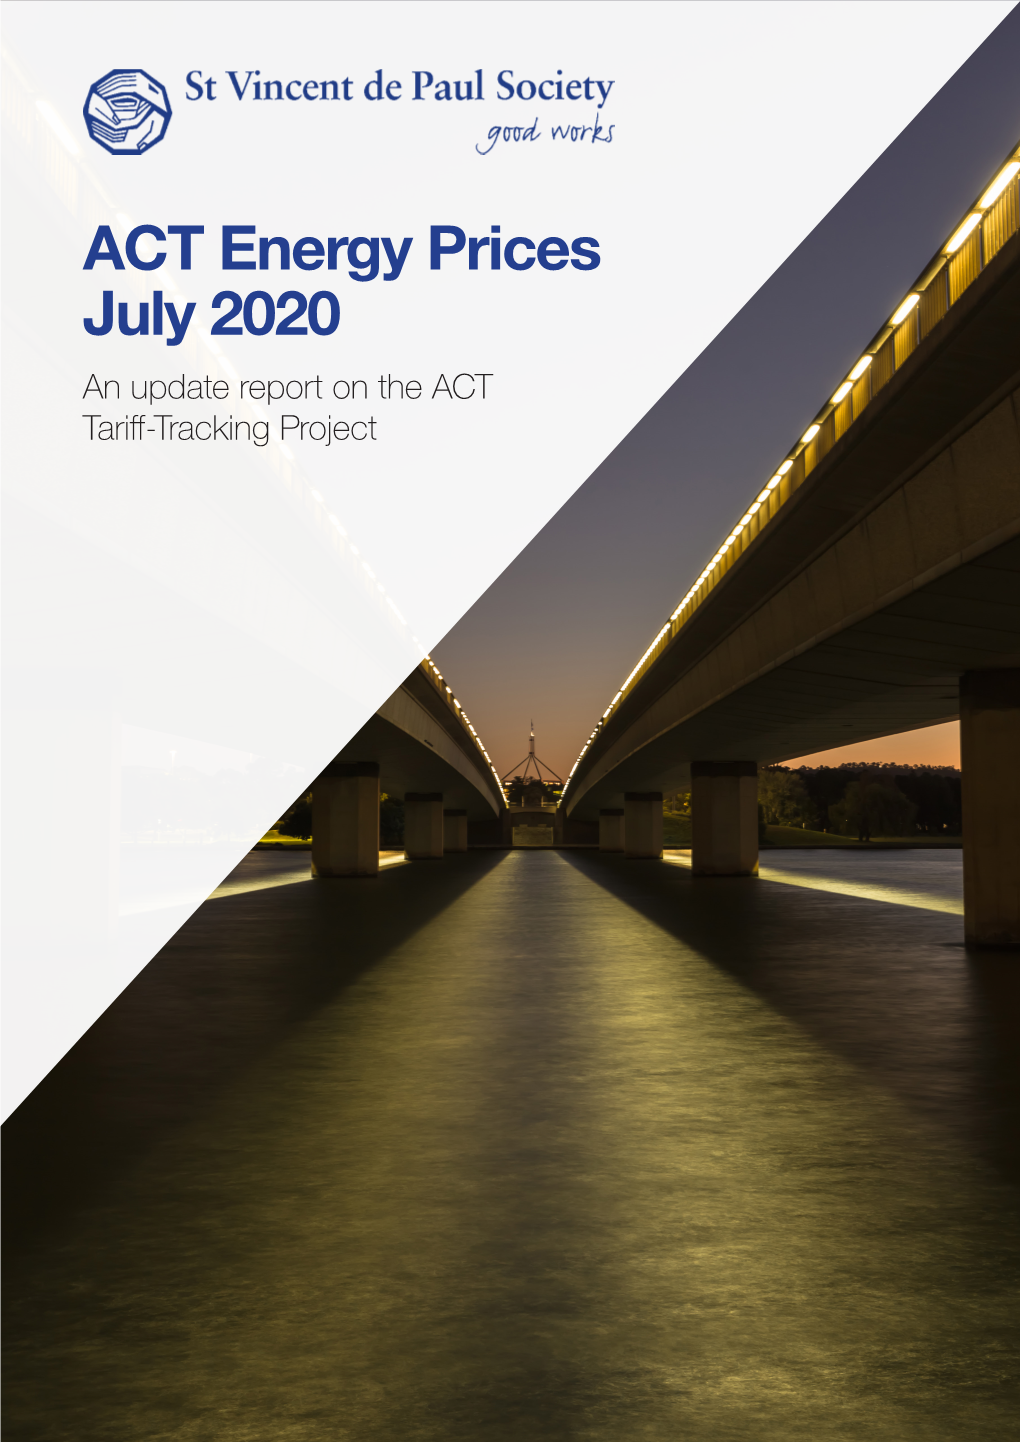 ACT Energy Prices July 2020 an Update Report on the ACT Tariff-Tracking Project ACT Energy Prices July 2020 an Update Report on the ACT Tariff-Tracking Project